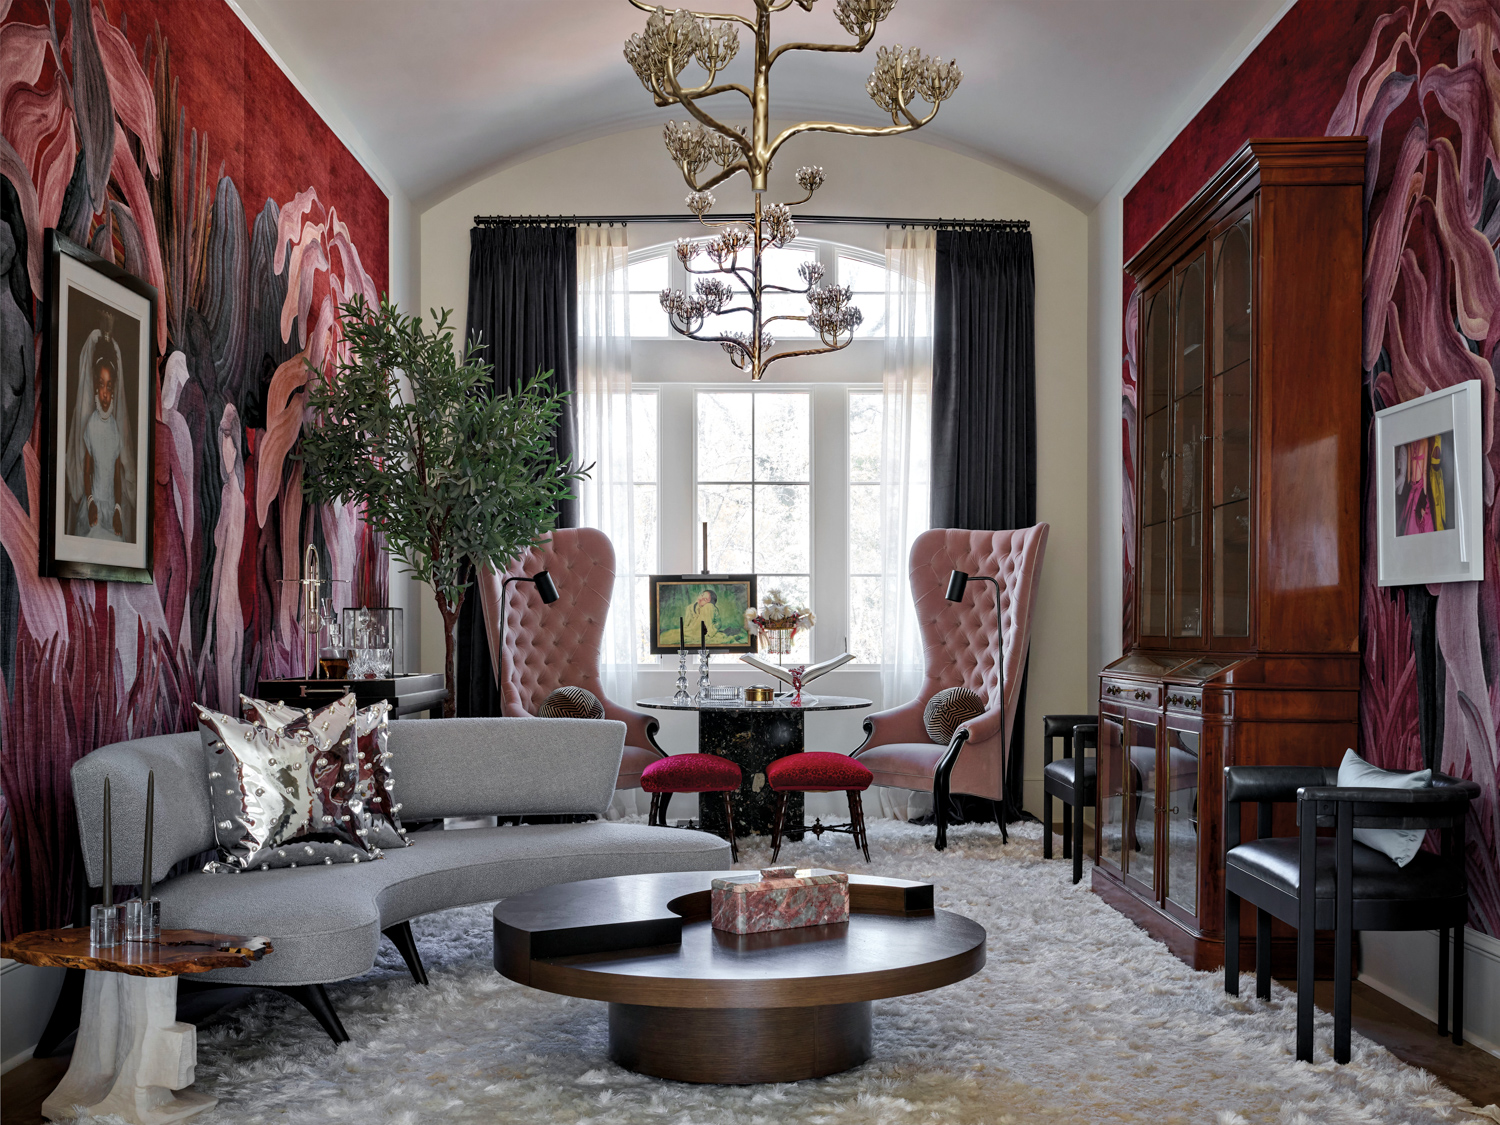 Living space with red wallcovering, sculptural light fixture, pink velvet armchairs and a curved gray sofa